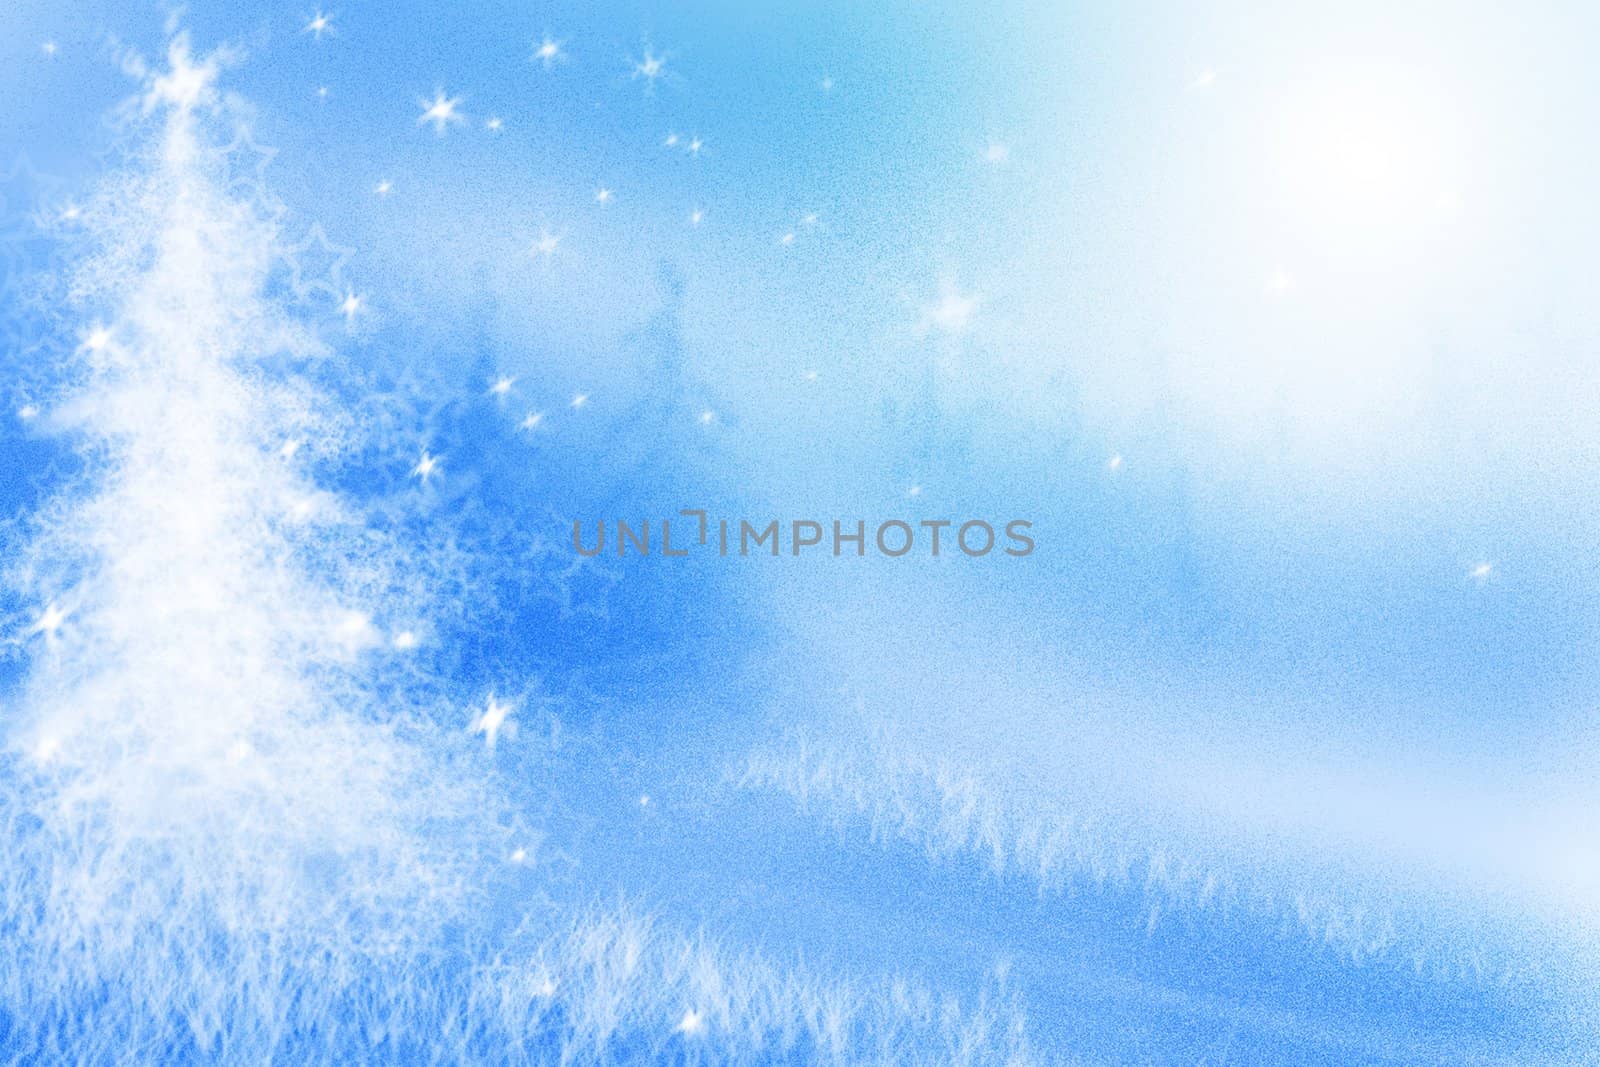 An abstract blue christmas background